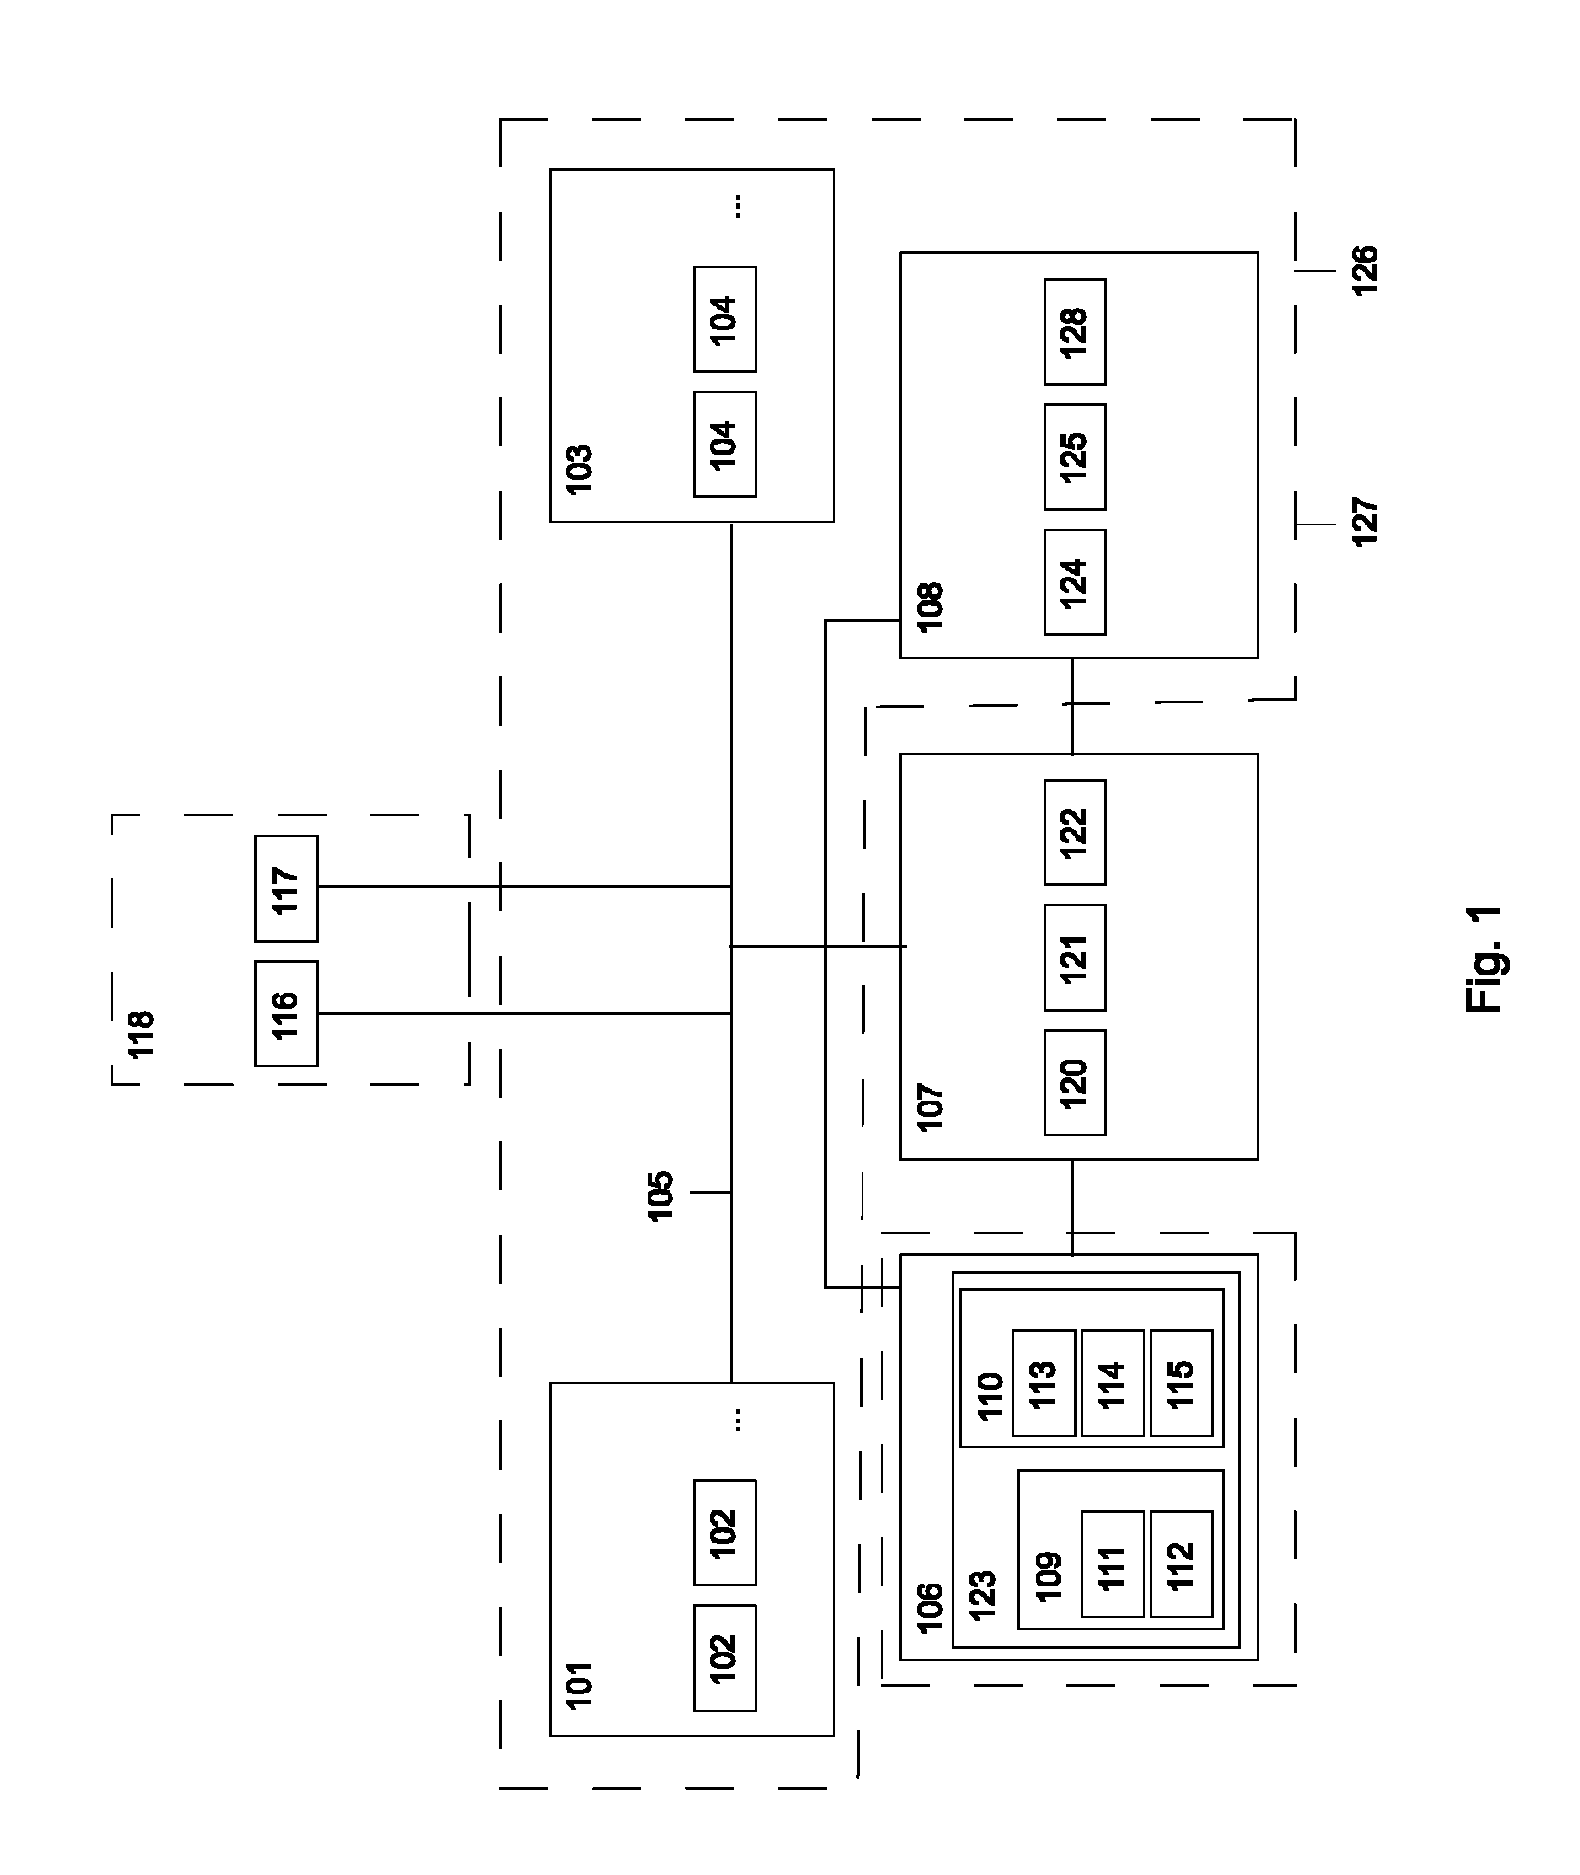 Methods and apparatus for increasing the efficiency of electronic data storage and transmission